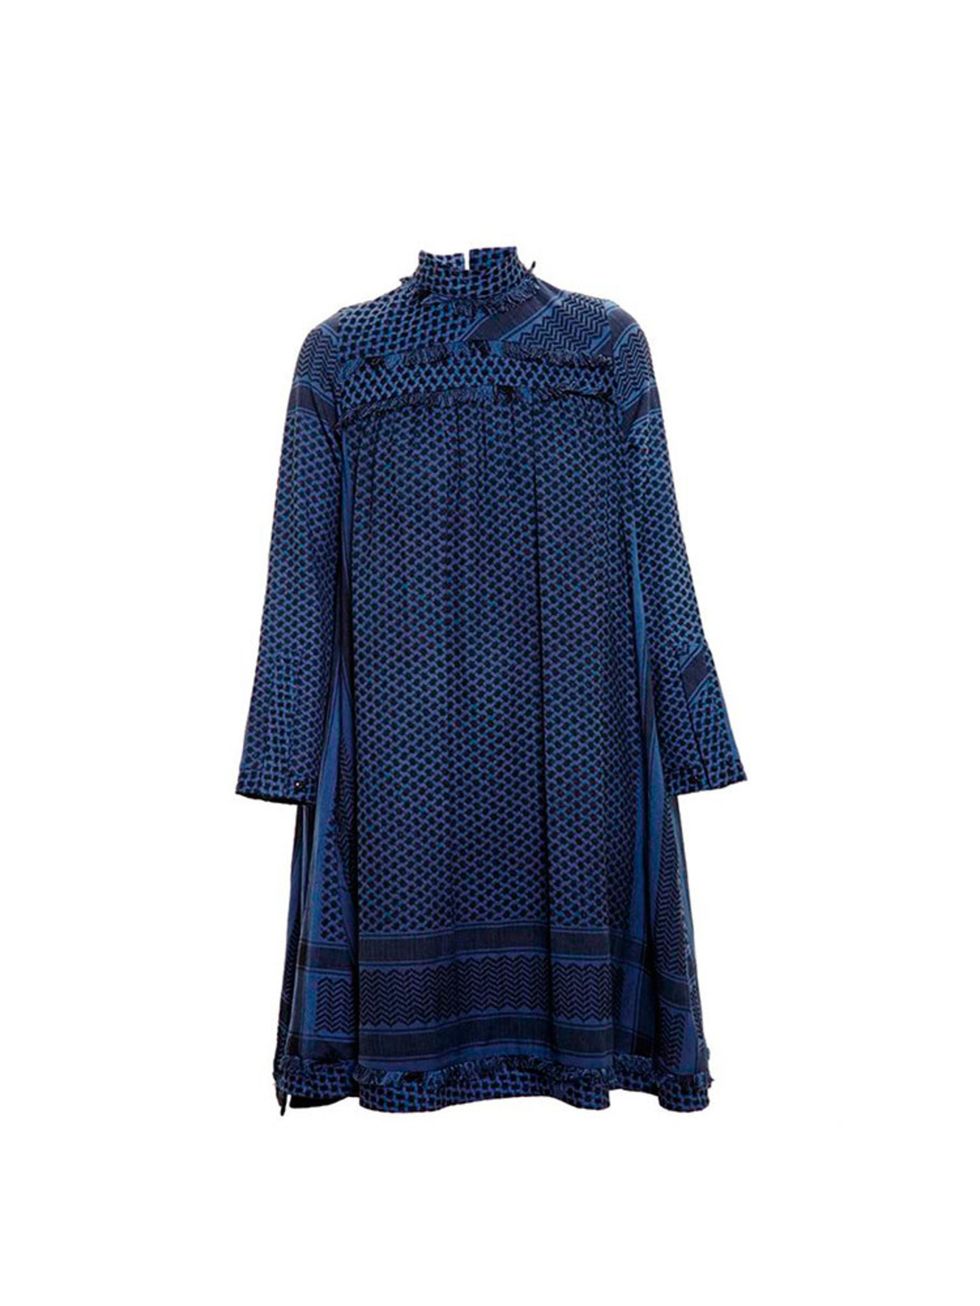 <p><a href="http://www.brownsfashion.com/product/03C309820002/039/high-neck-keffiyeh-dress" target="_blank">Cecile Copenhagen</a> dress, £200 available at browns.com</p>